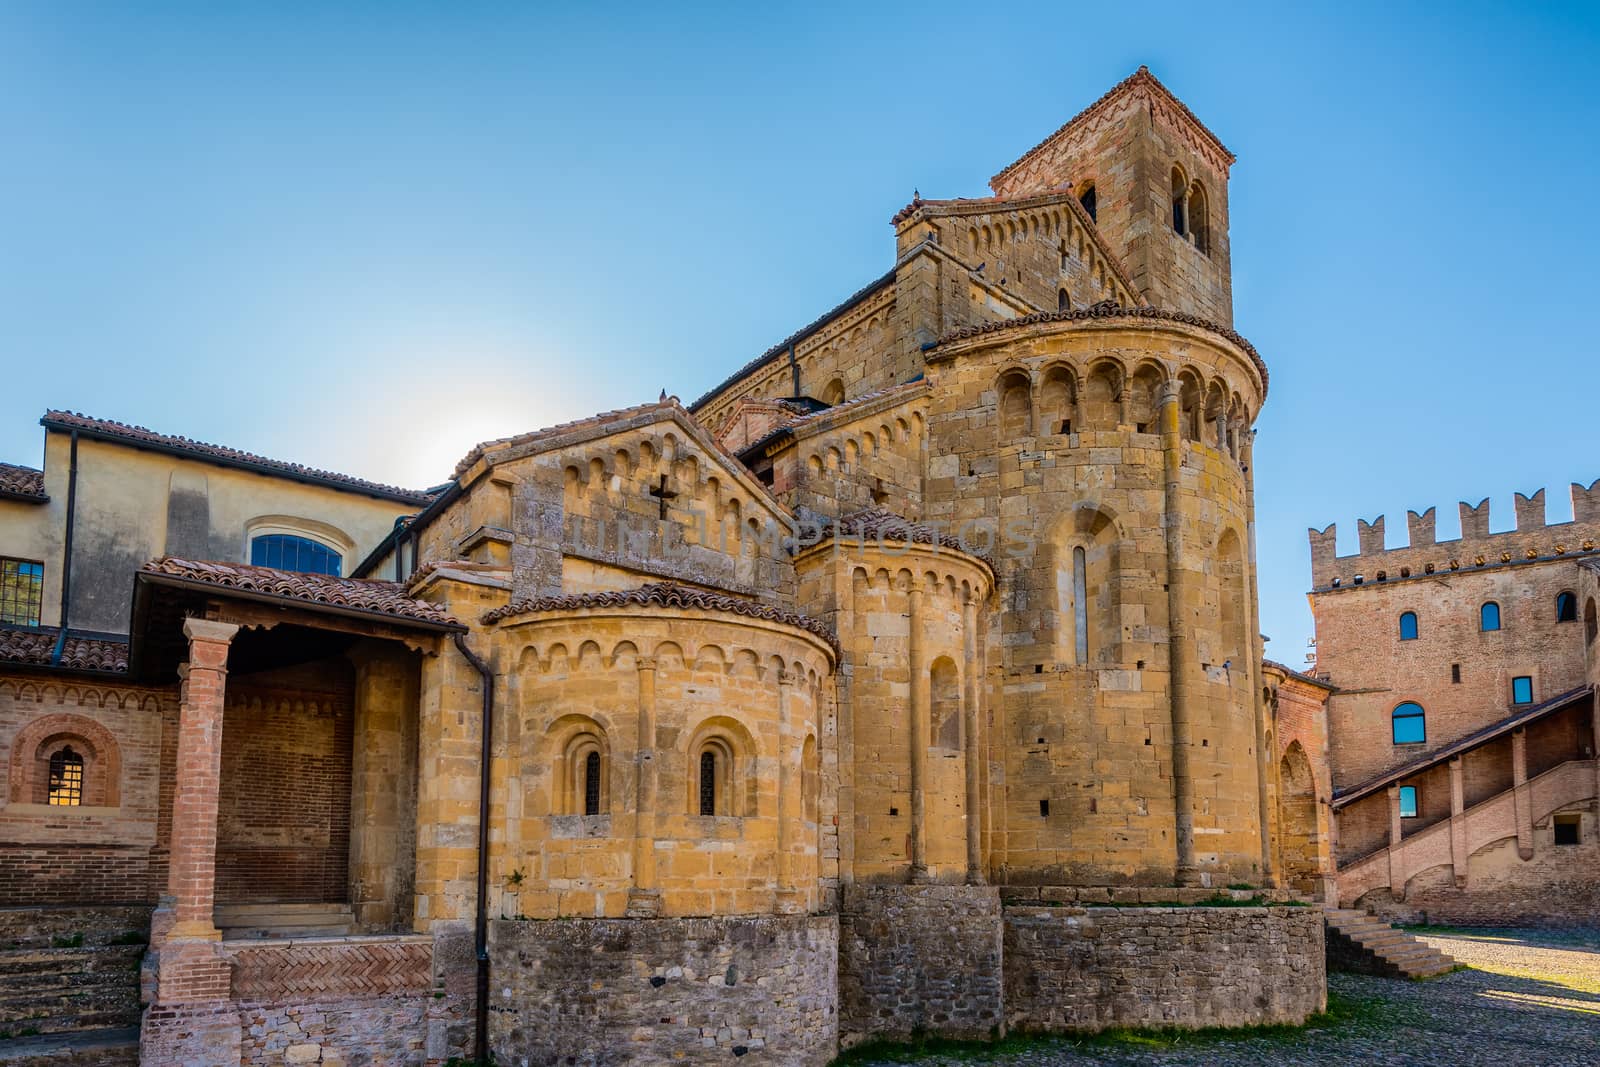 In the picture the Collegiate Castell'Arquato near Piacenza, the church is of medieval origin and dates back to the year 758 .